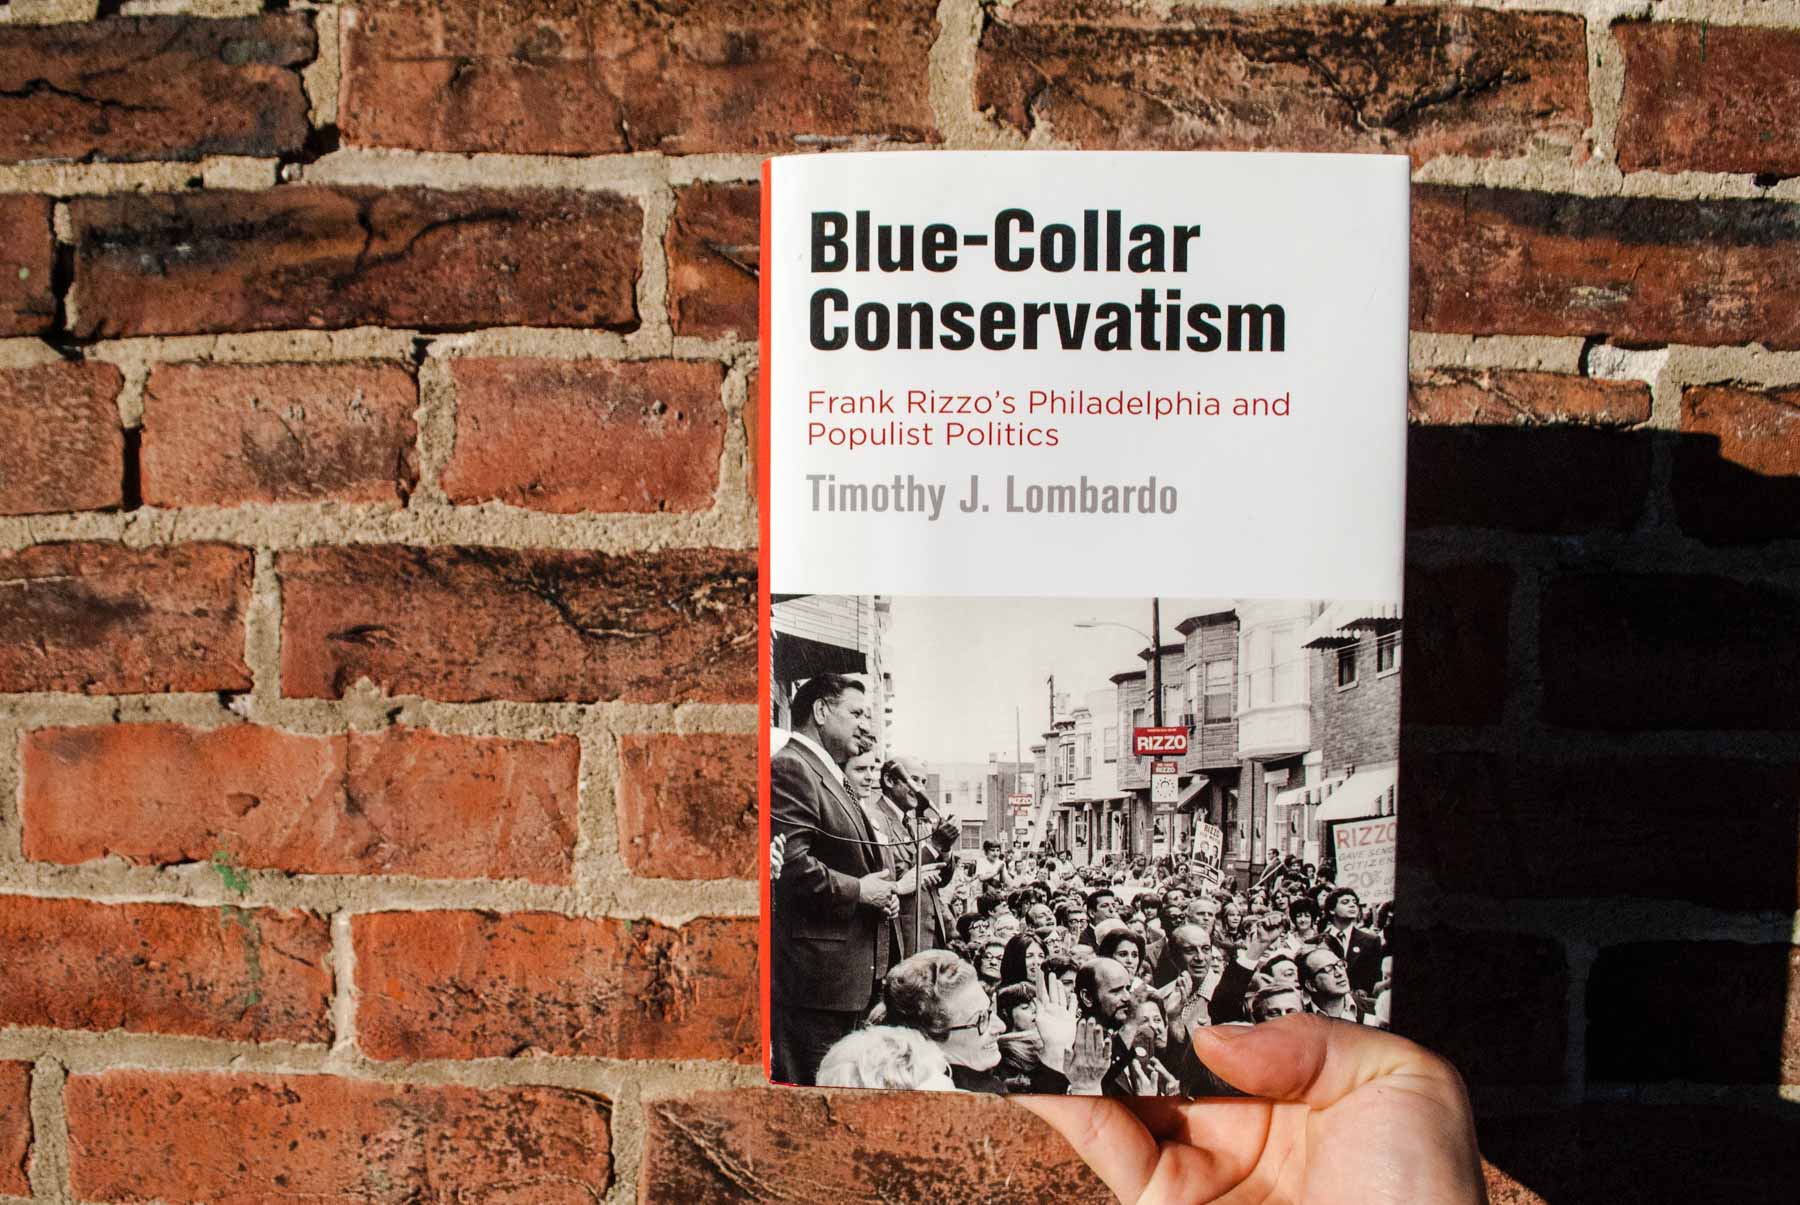 Monk Reviews Blue-Collar Conservatism by Timothy J. Lombardo